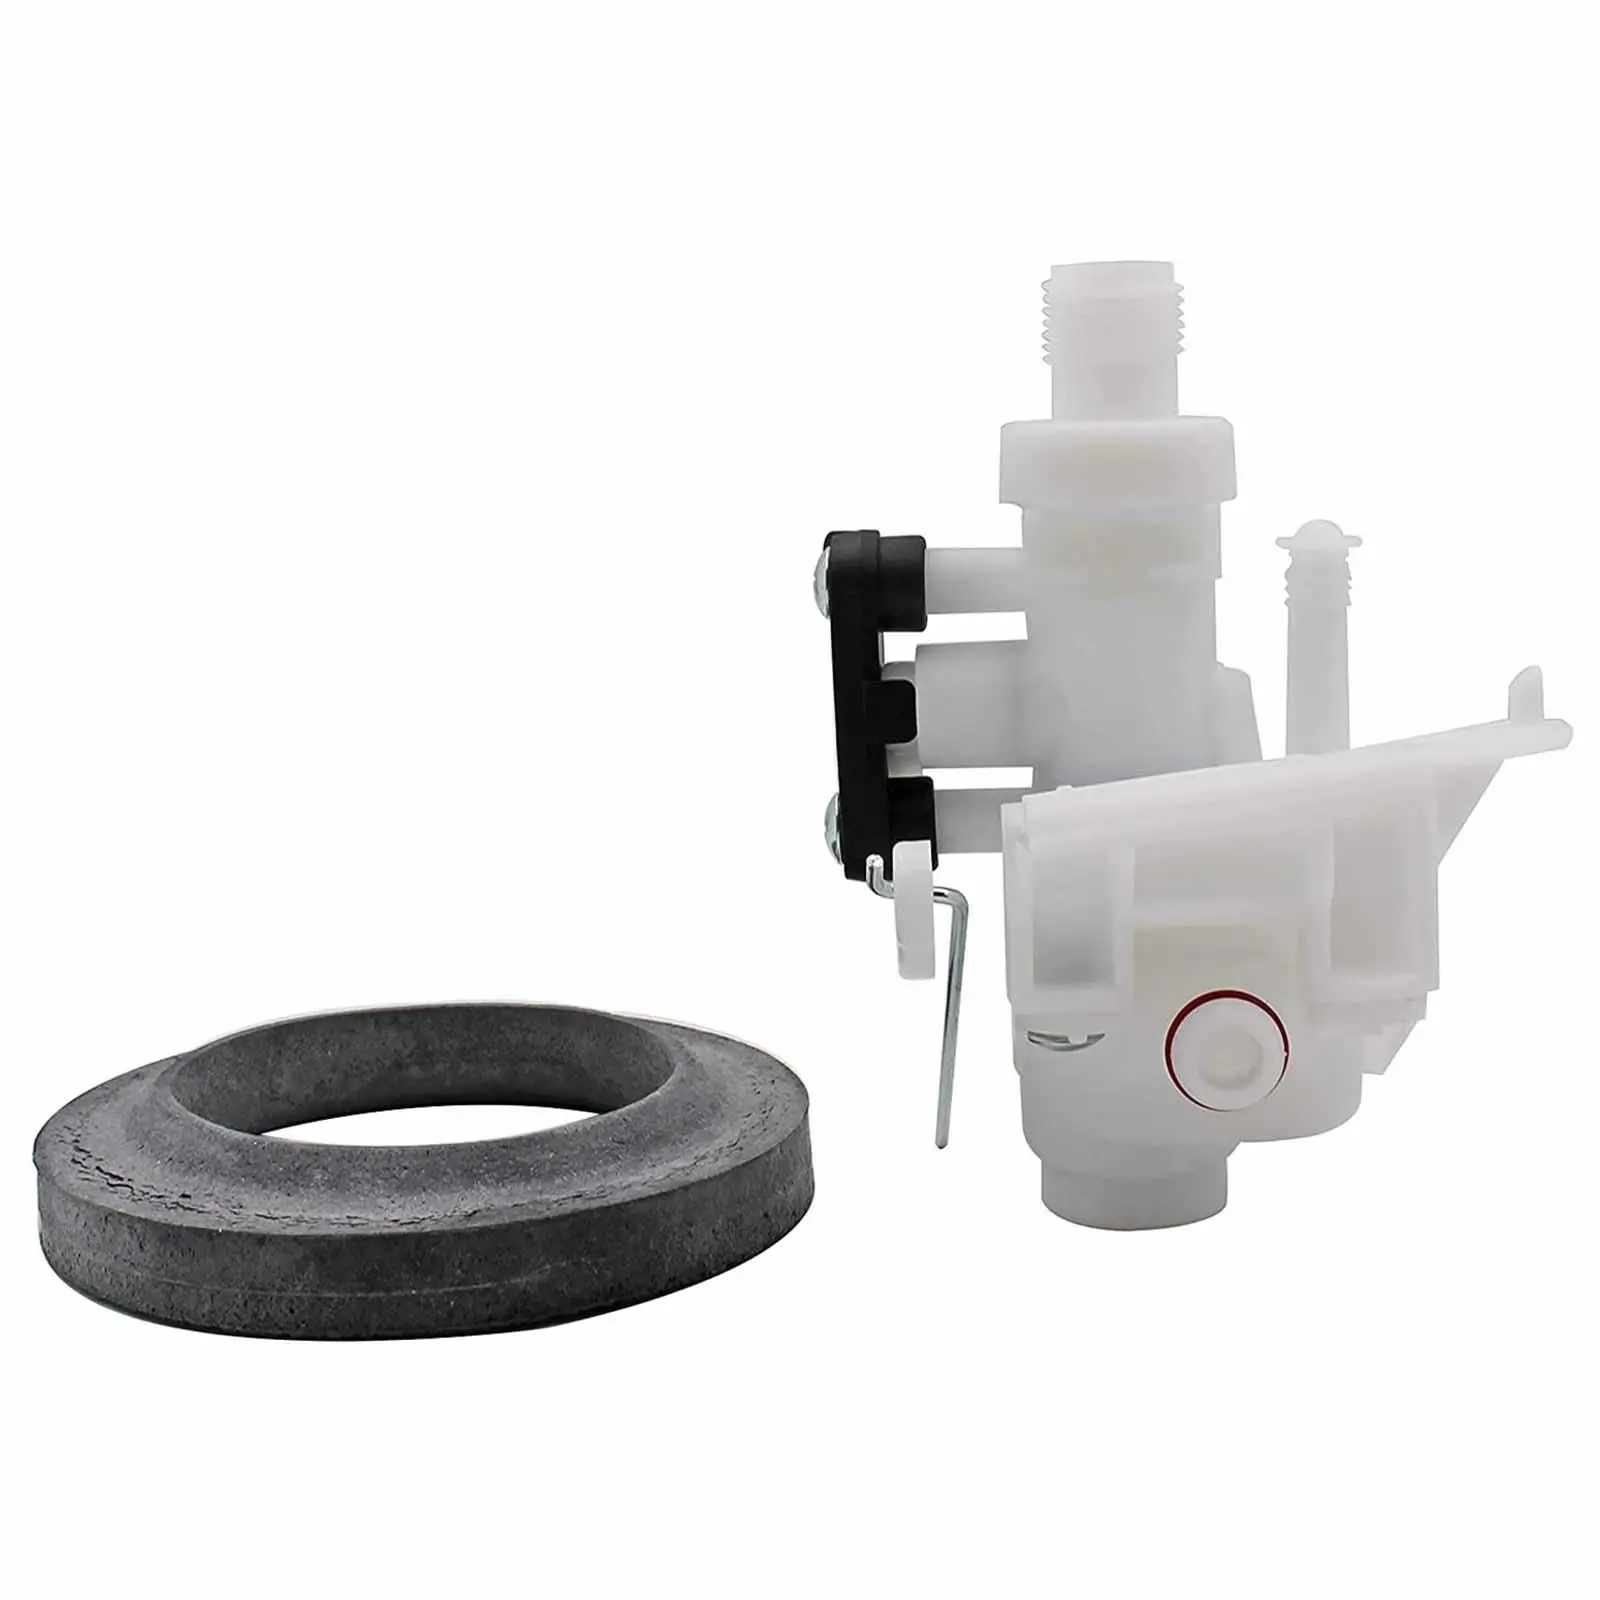 31705 Water Valve Leak Resistant Practical Professional Easy to Install Toilet Water Valve for Camper Motor Home Replace Parts